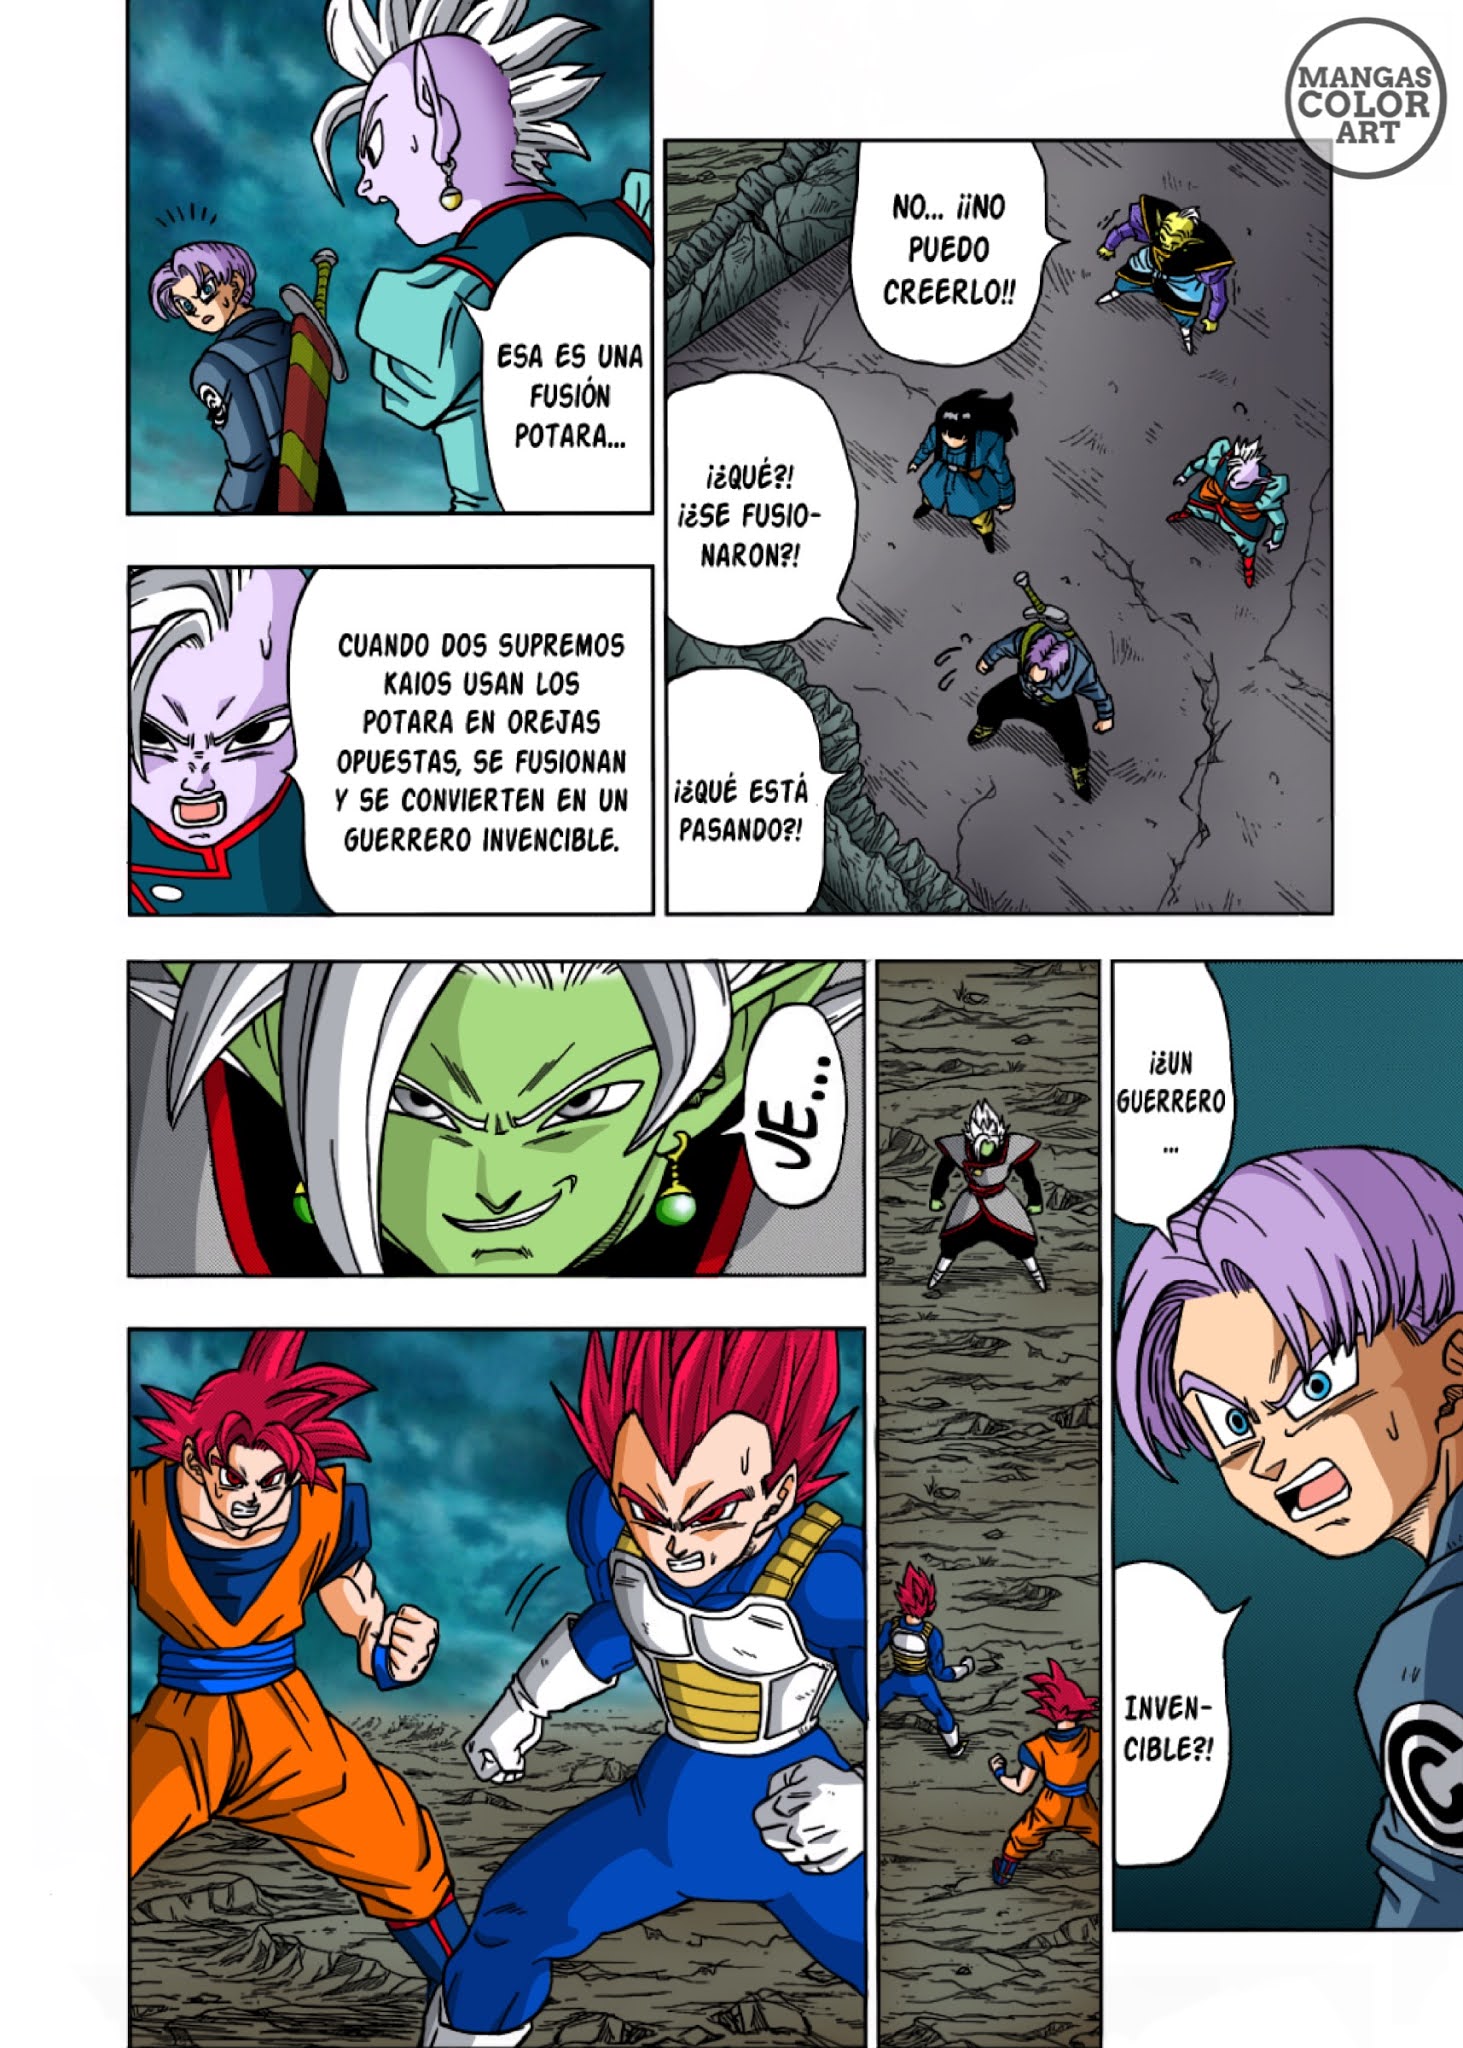 Dragon Ball Super Manga 23 color (first part) by bolman2003JUMP on